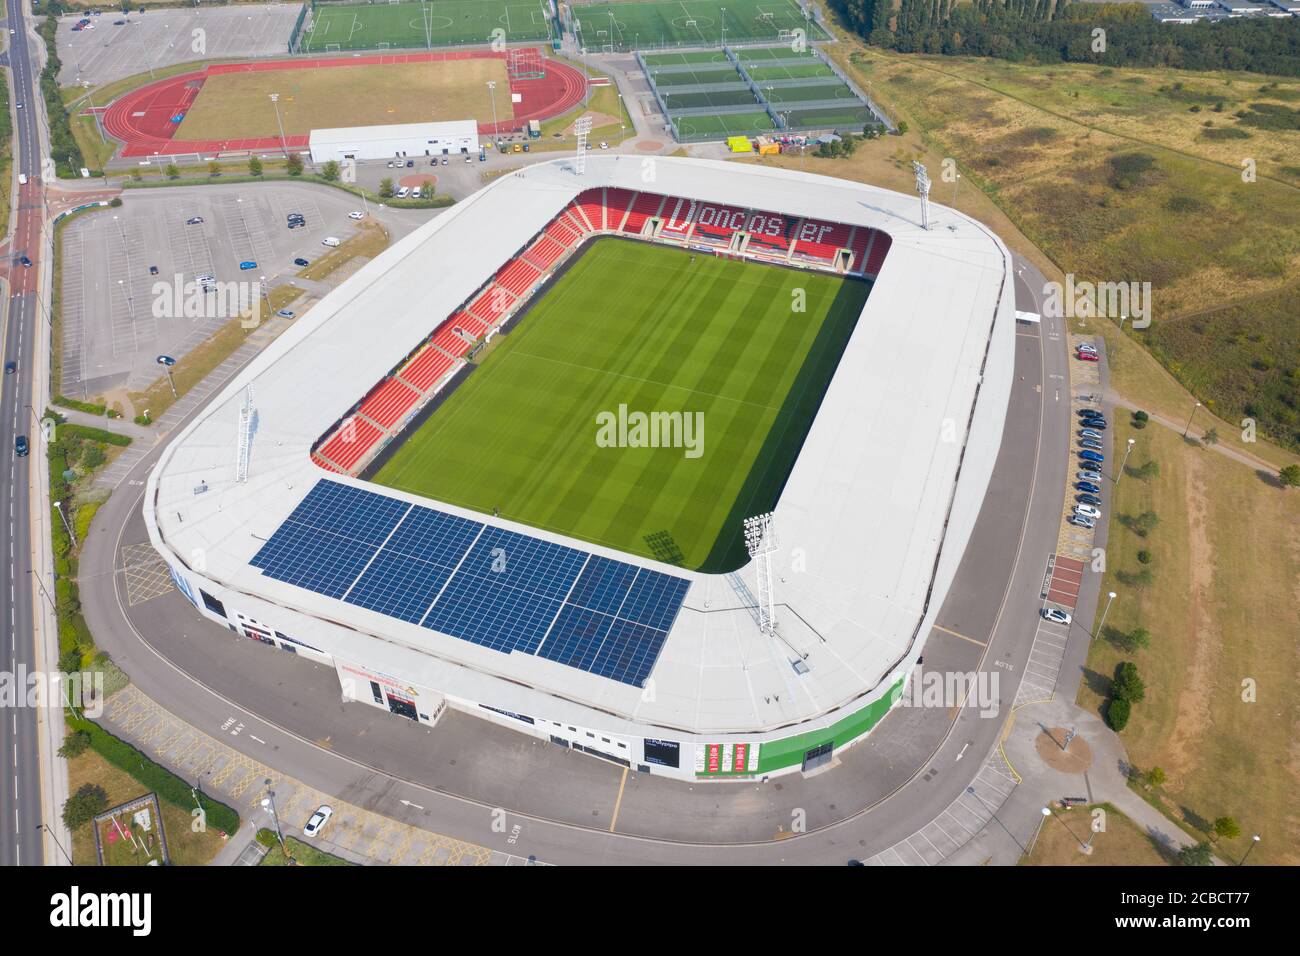 Doncaster UK, 12th Aug 2020: Aerial photo of the Keepmoat Stadium located in the town of Doncaster in the UK home of the Doncaster Rovers Football Clu Stock Photo